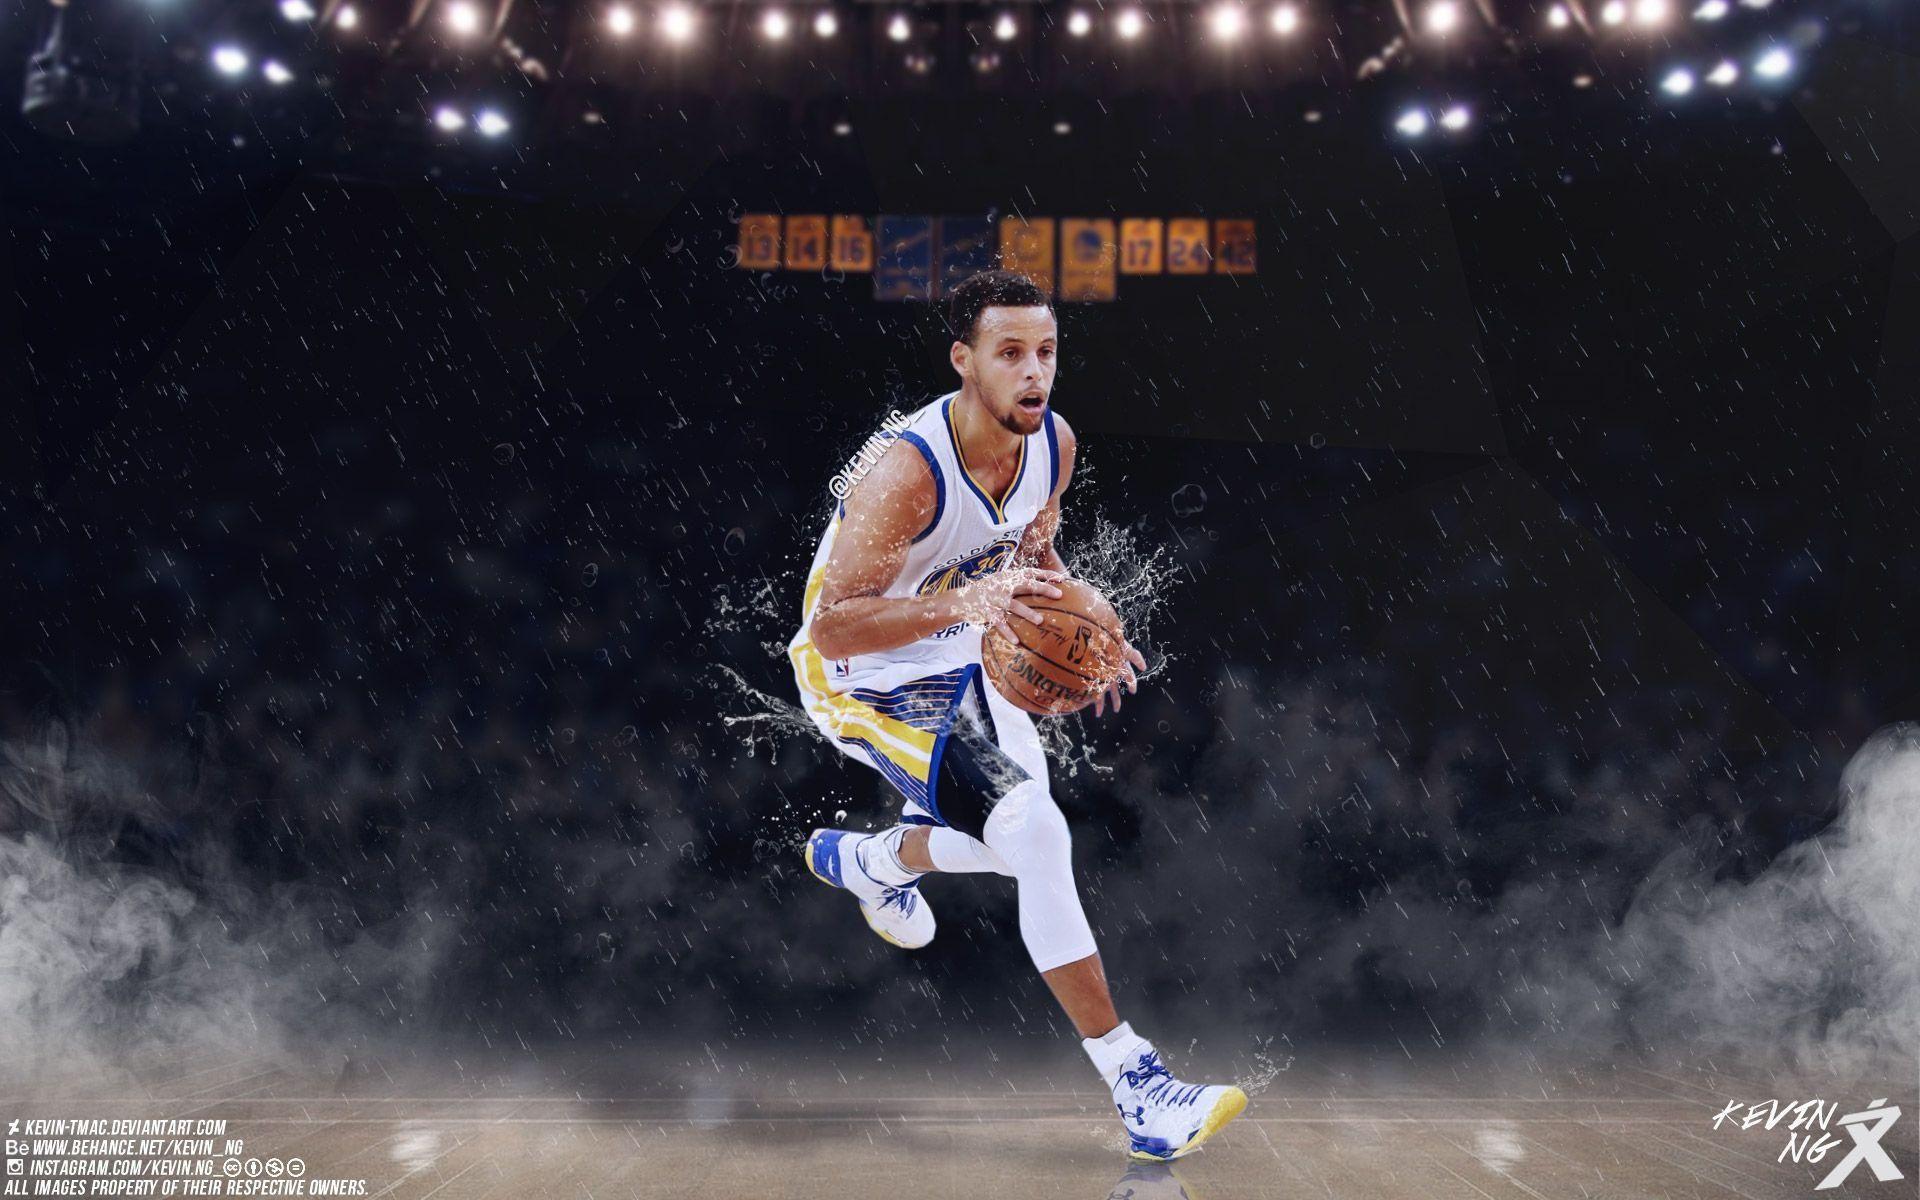 2018 Stephen Curry Wallpaper And Background Image HD